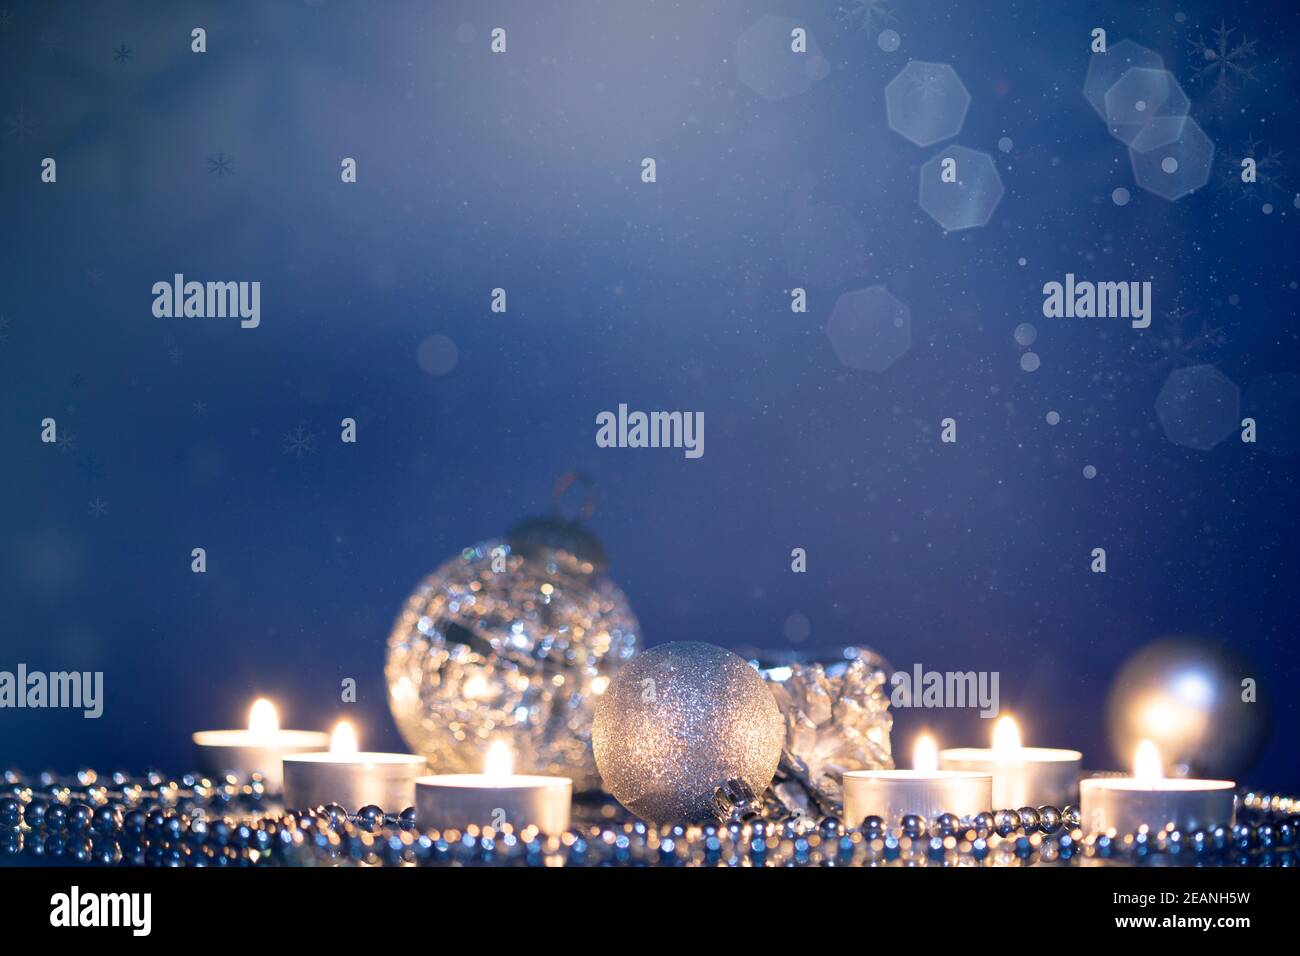 Magic silver holiday glitter background with Christmas decoration Stock ...